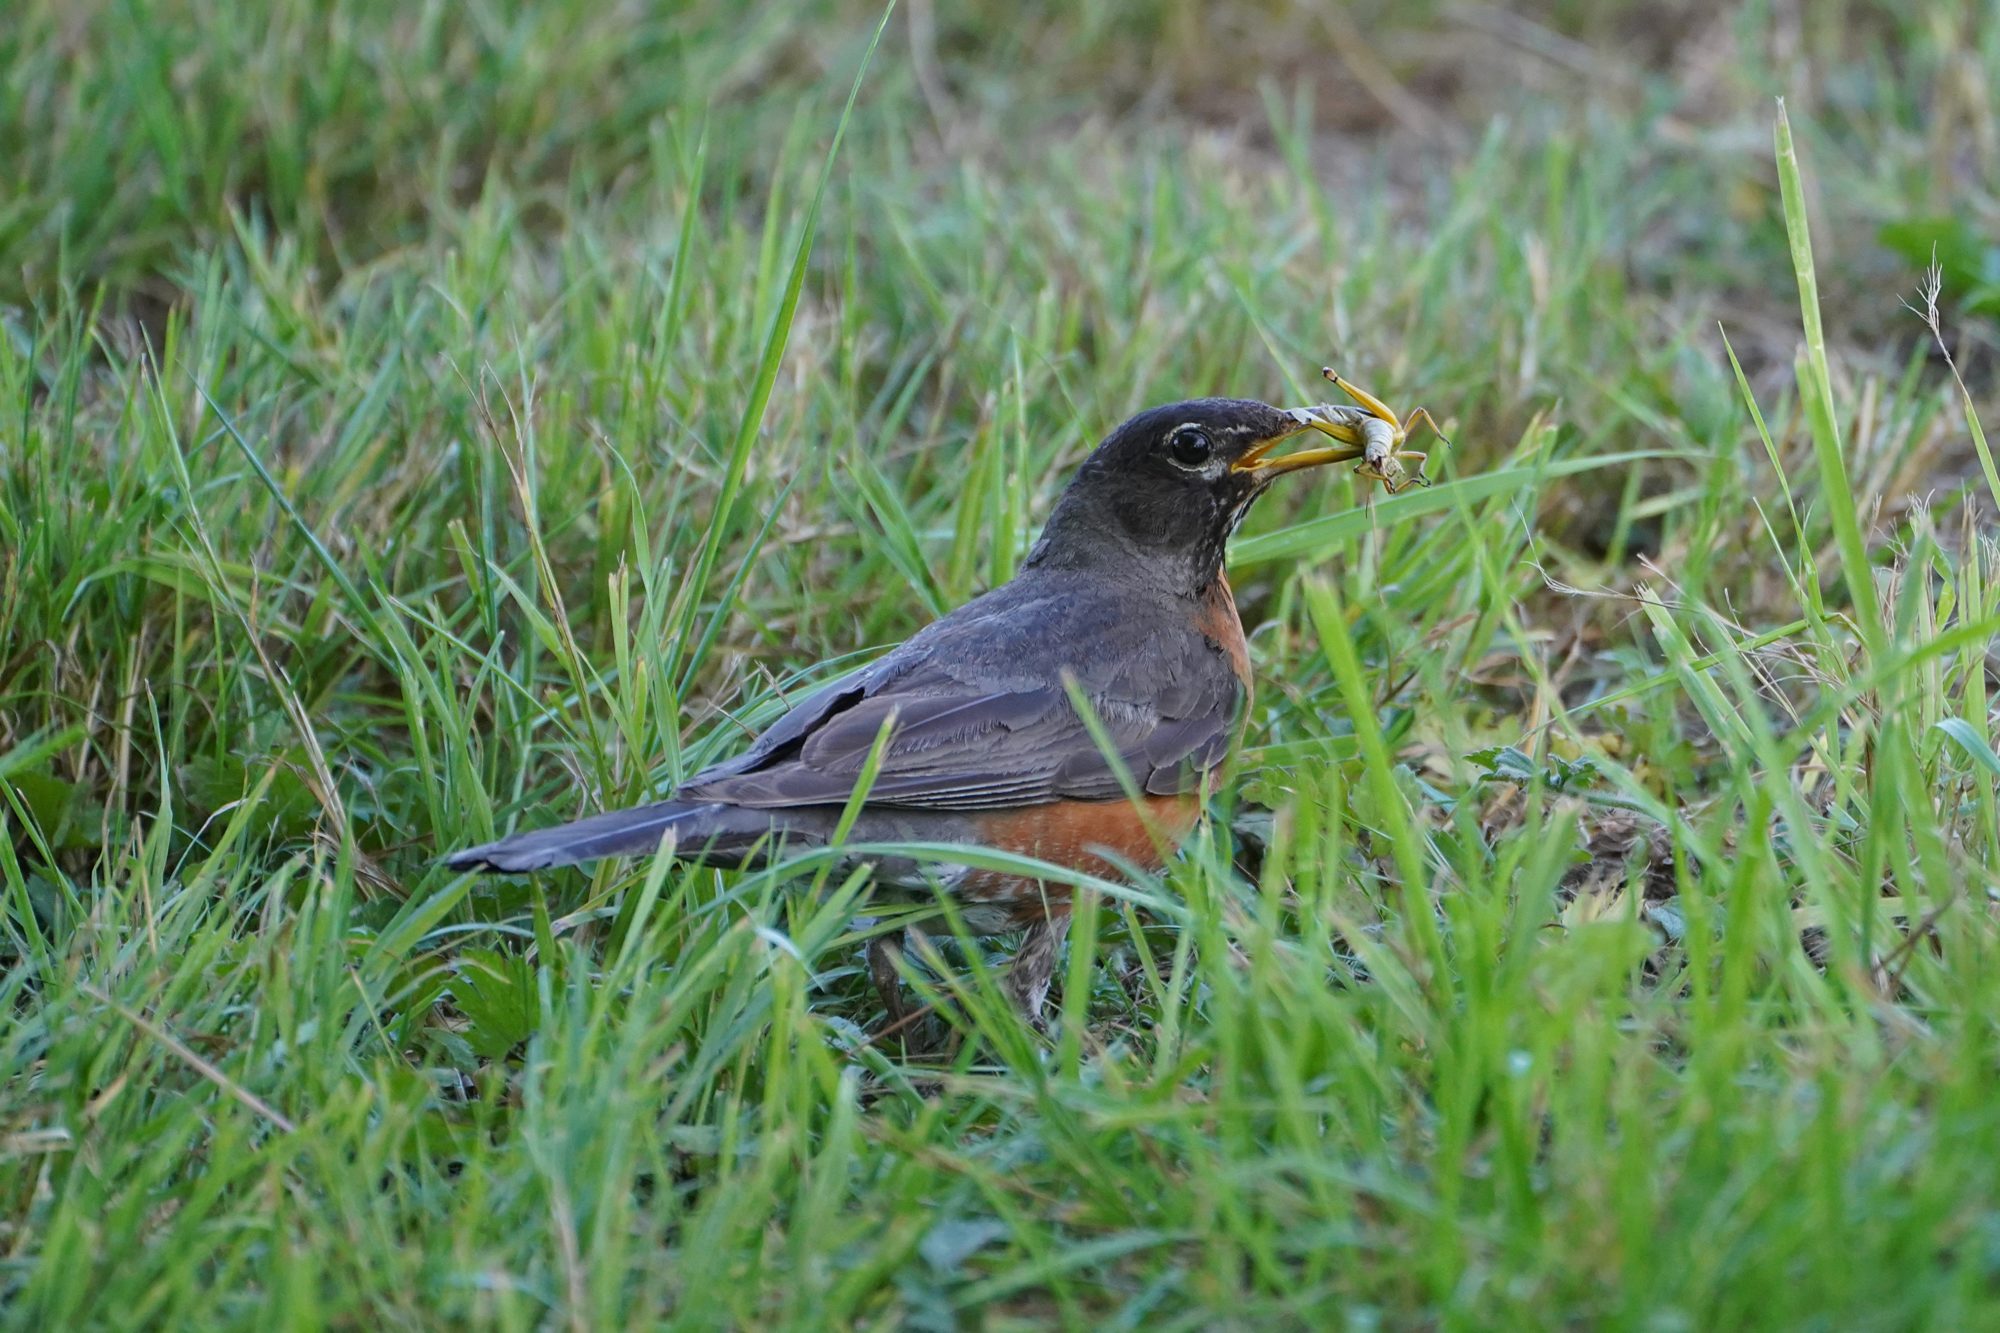 A robin is standing in the grass, holding a live grasshopper in its beak